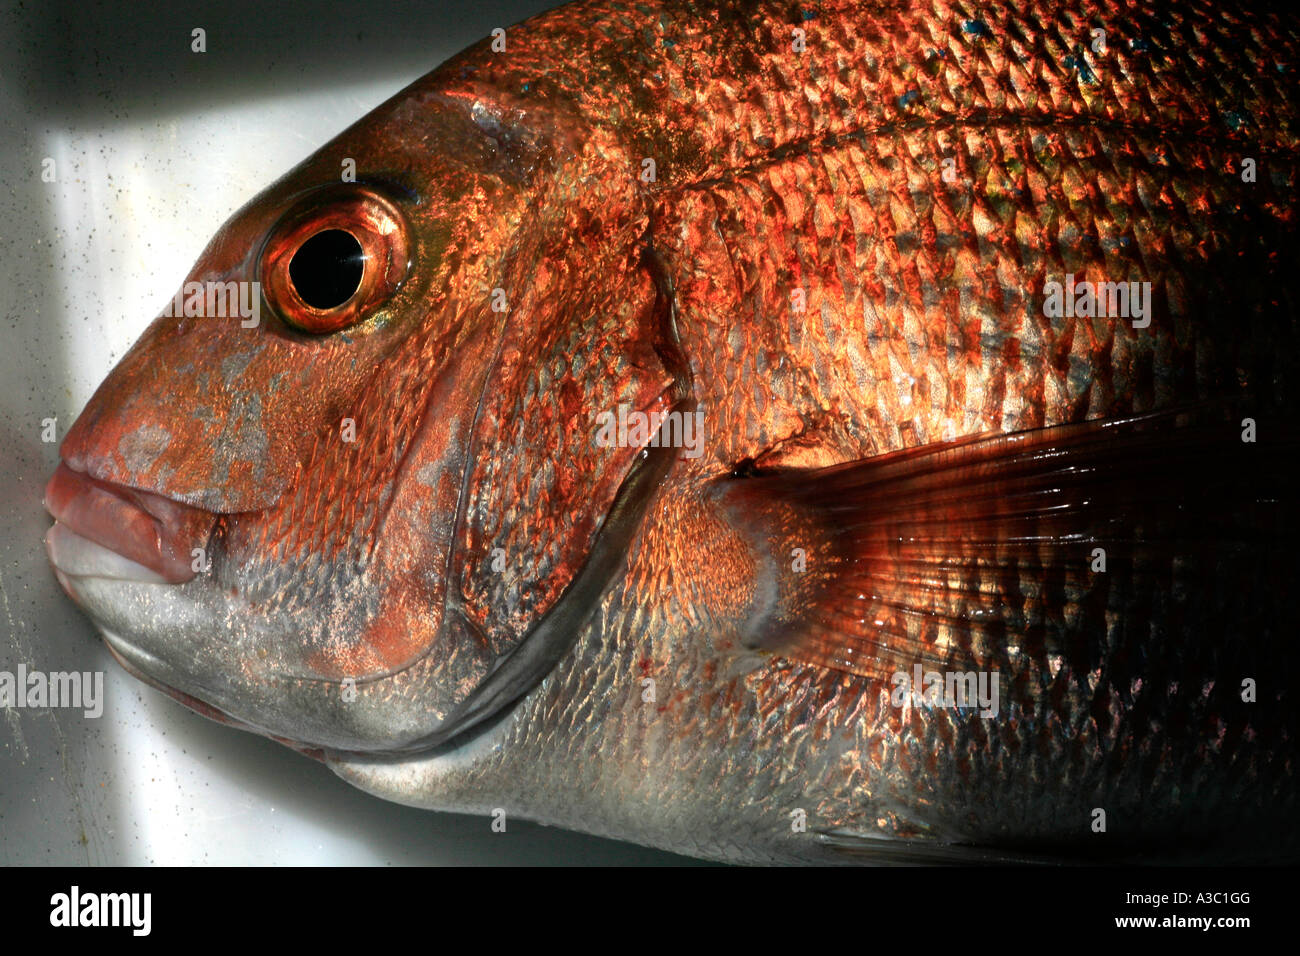 A freshly caught snapper off the New Zealand coast Stock Photo